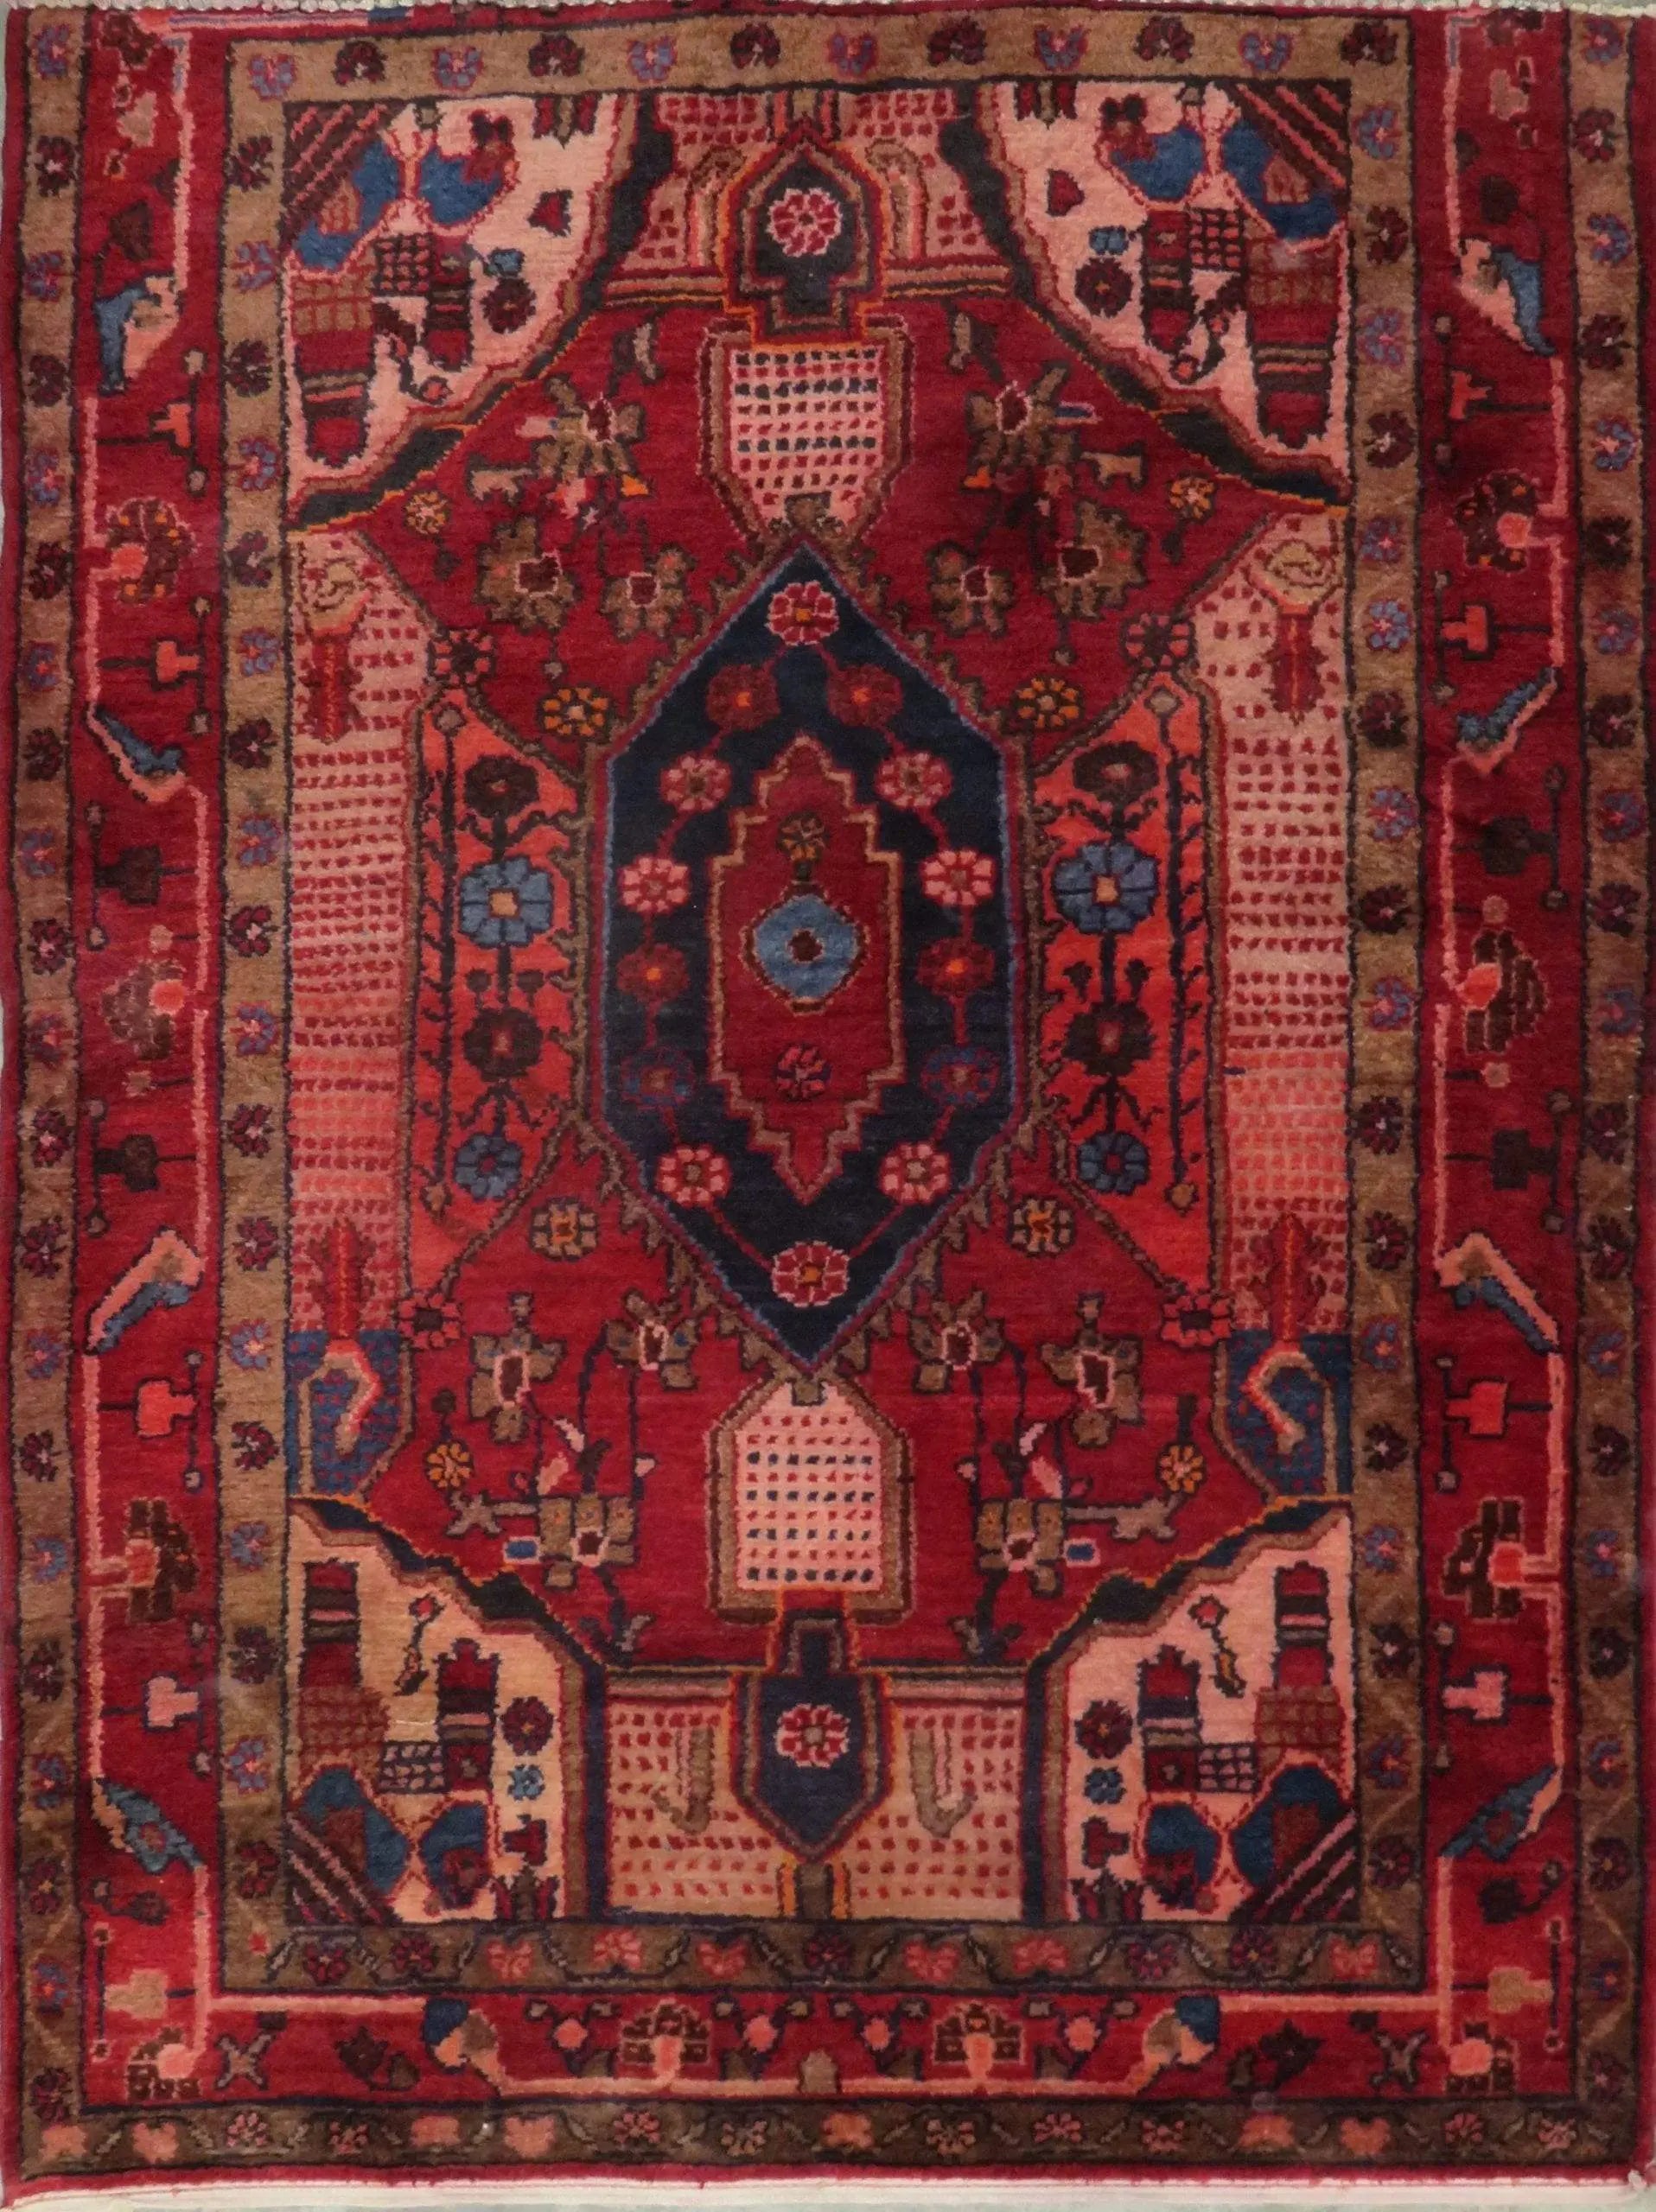 Hand-Knotted Persian Wool Rug _ Luxurious Vintage Design, 5'1" x 3'8", Artisan Crafted